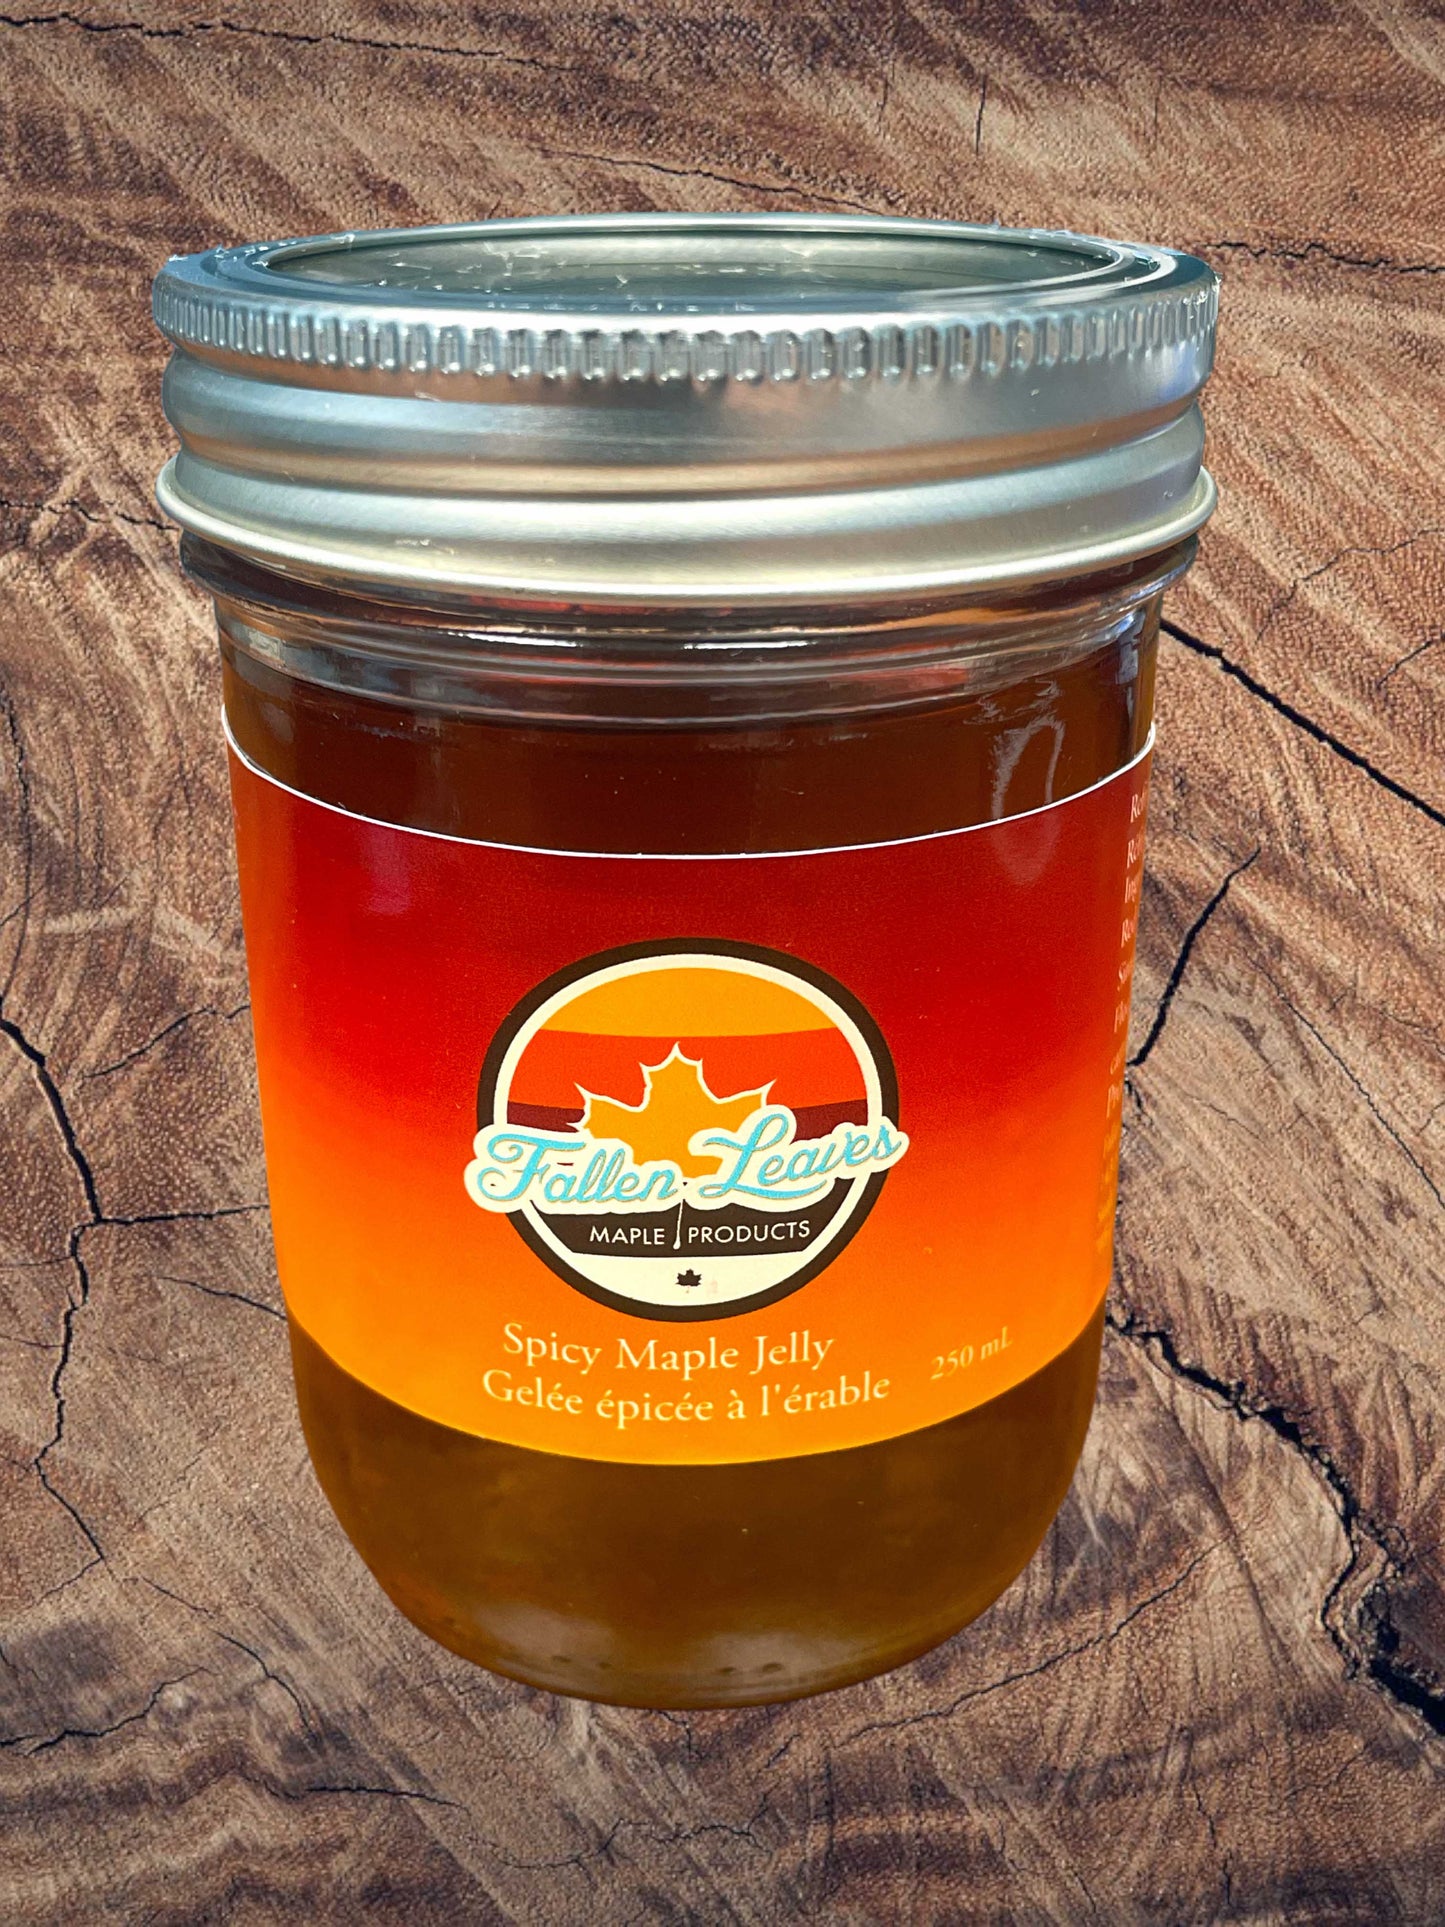 Spicy Maple Jelly Fallen Leaves Maple Products